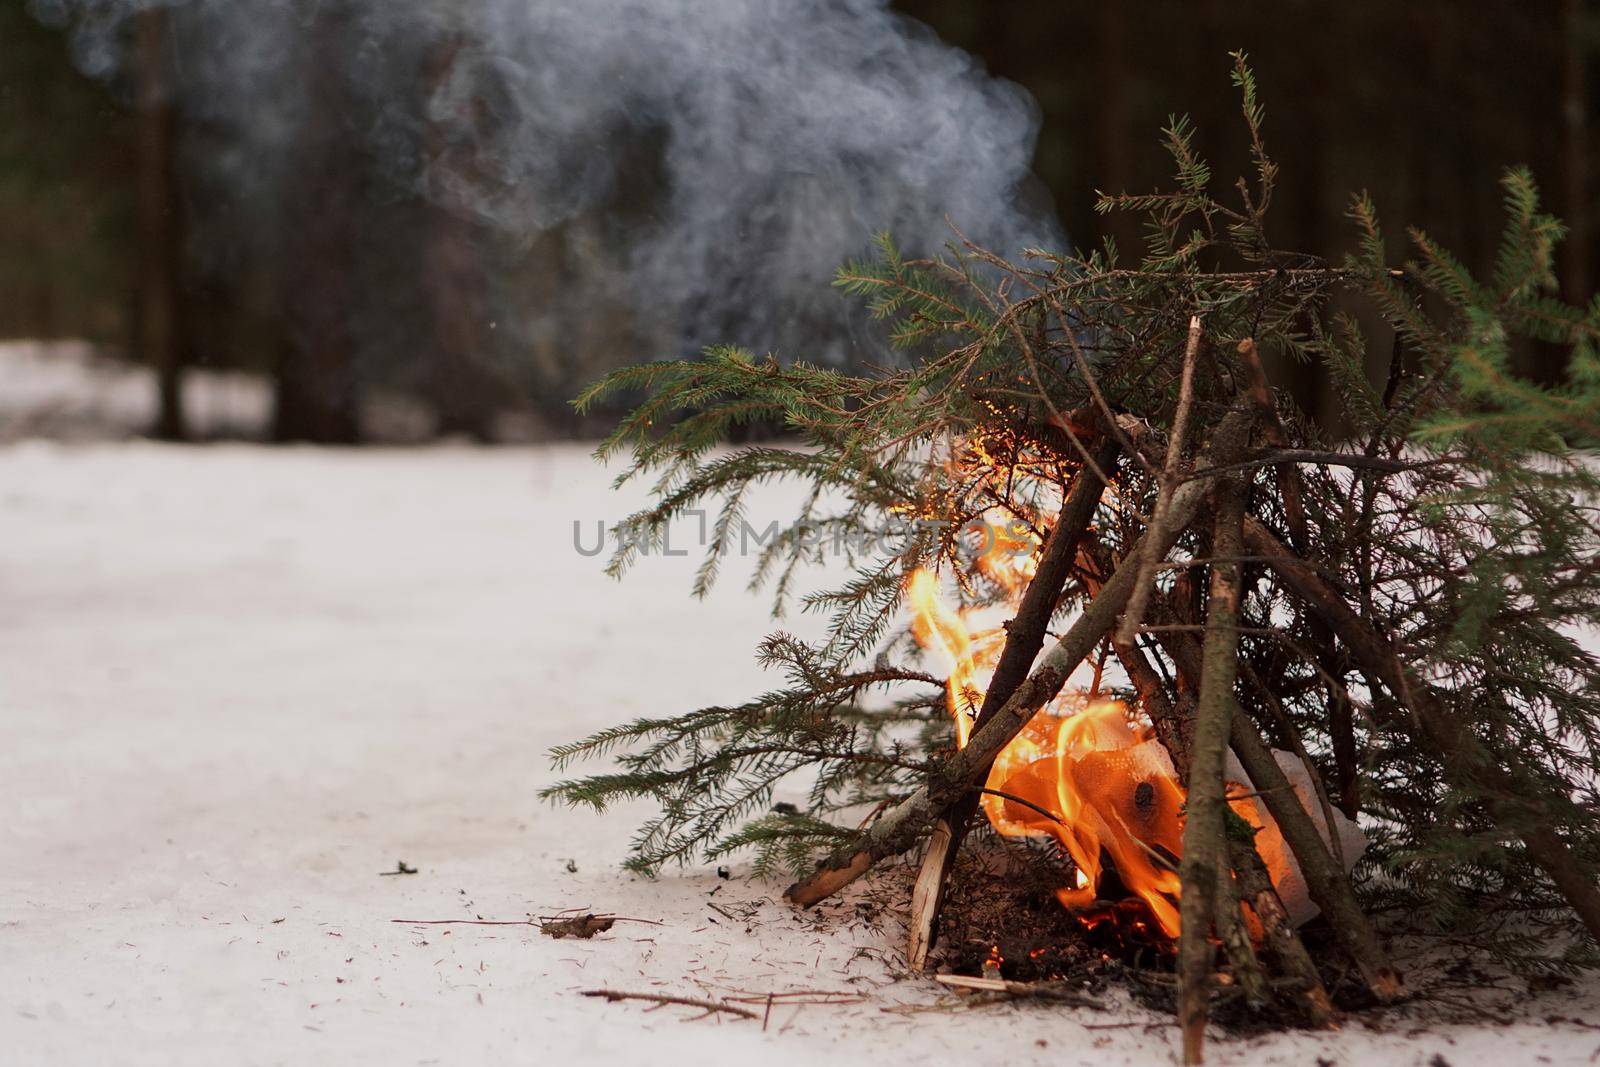 Bonfire of fir branches in the winter forest by natali_brill